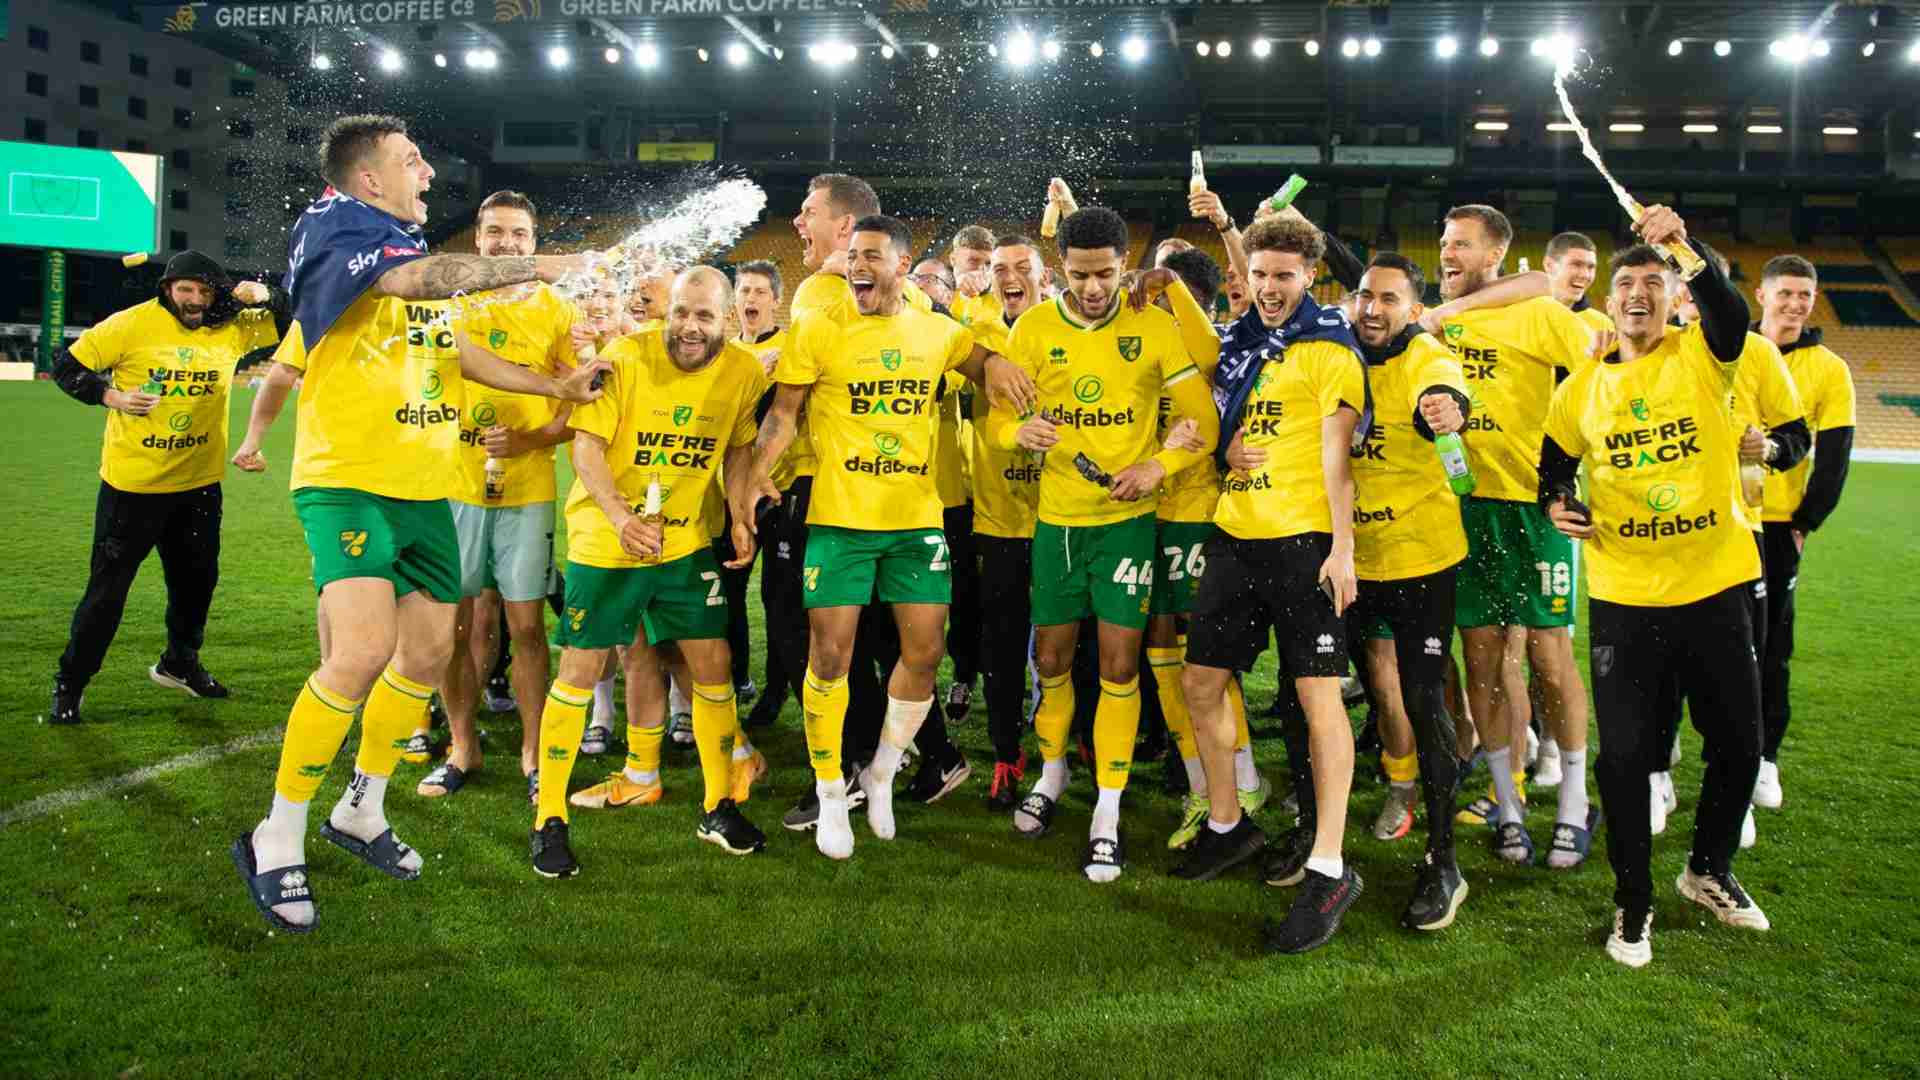 Norwich City celebrate their promotion, Image Credit: Facebook/Norwich City